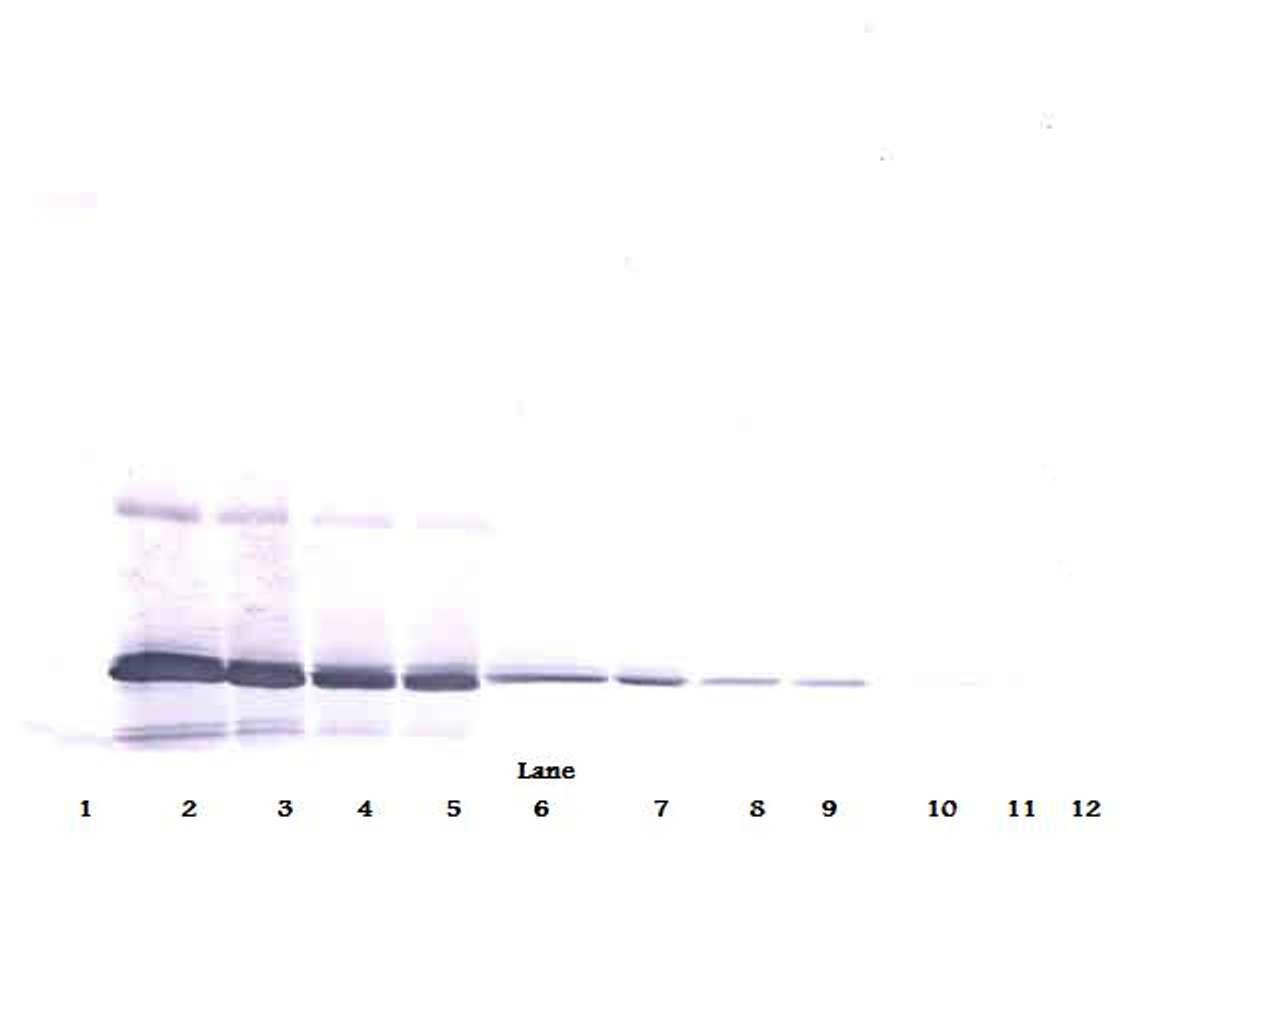 To detect hIL-11 by Western Blot analysis this antibody can be used at a concentration of 1.0-2.0 ug/ml. Used in conjunction with compatible secondary reagents the detection limit for recombinant hIL-11 is 0.25-0.50 ng/lane, under non-reducing conditions.